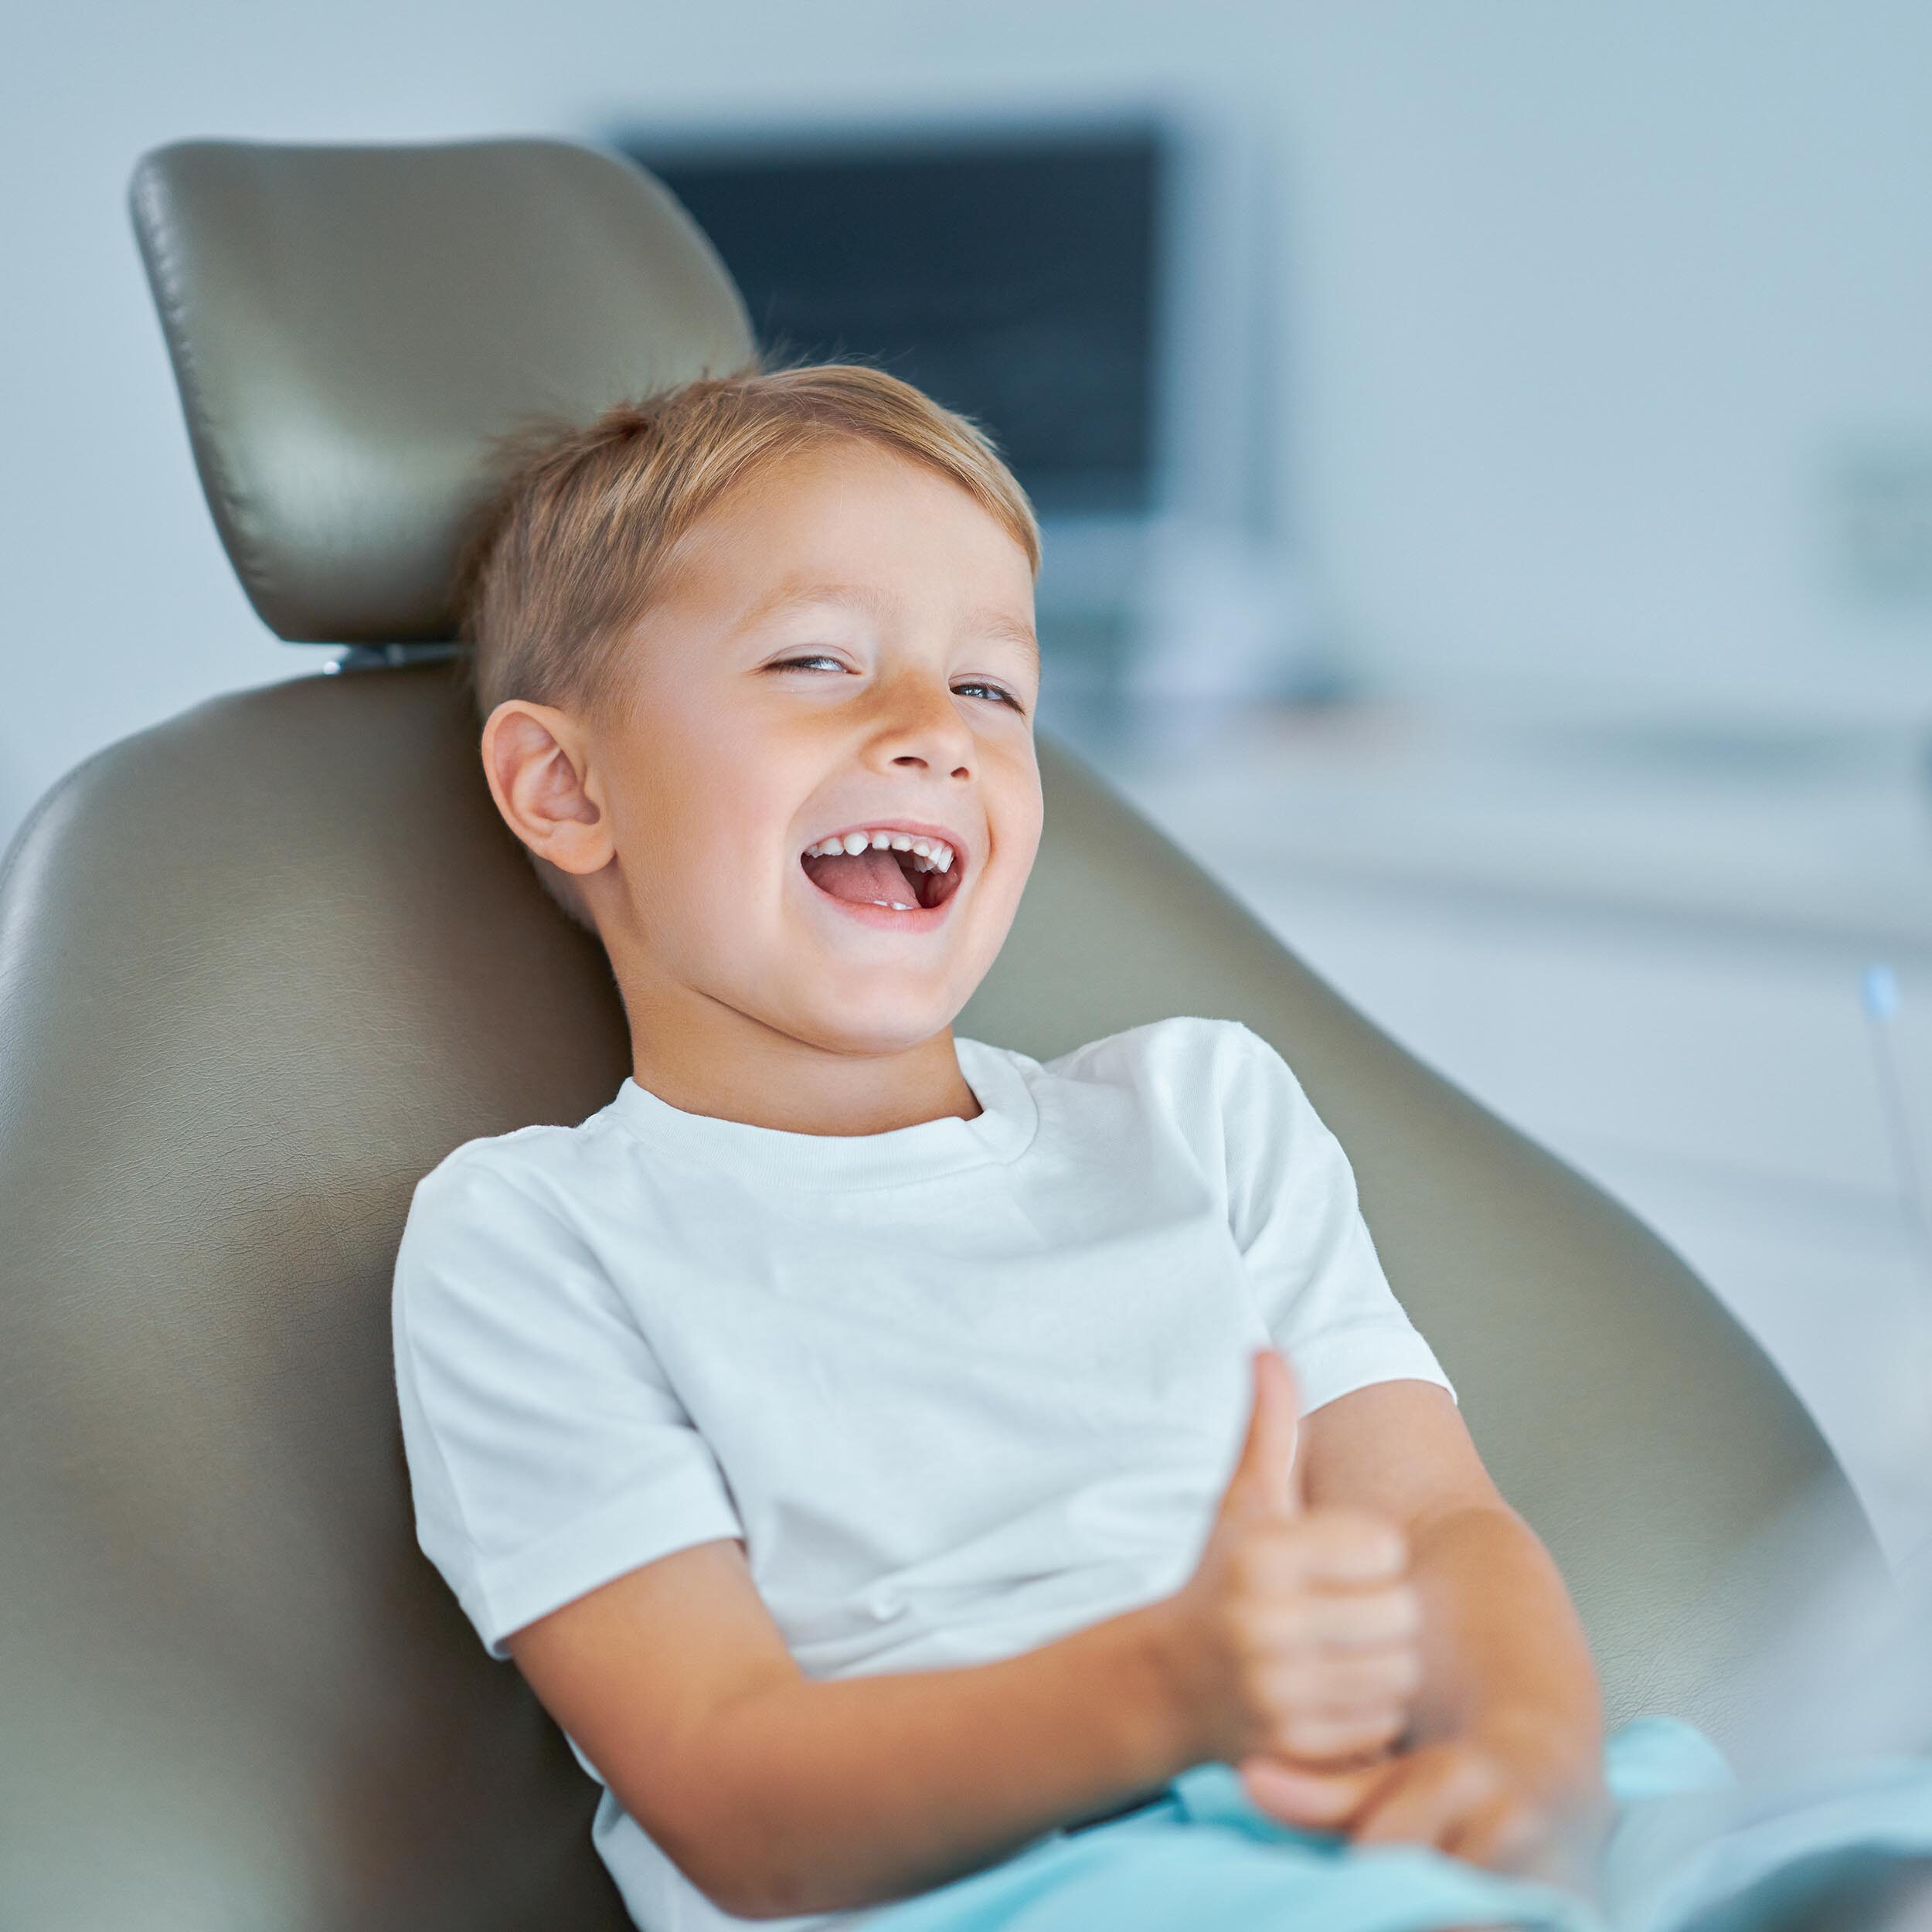 A young boy sitting in a dentist chair, giving a thumbs up.